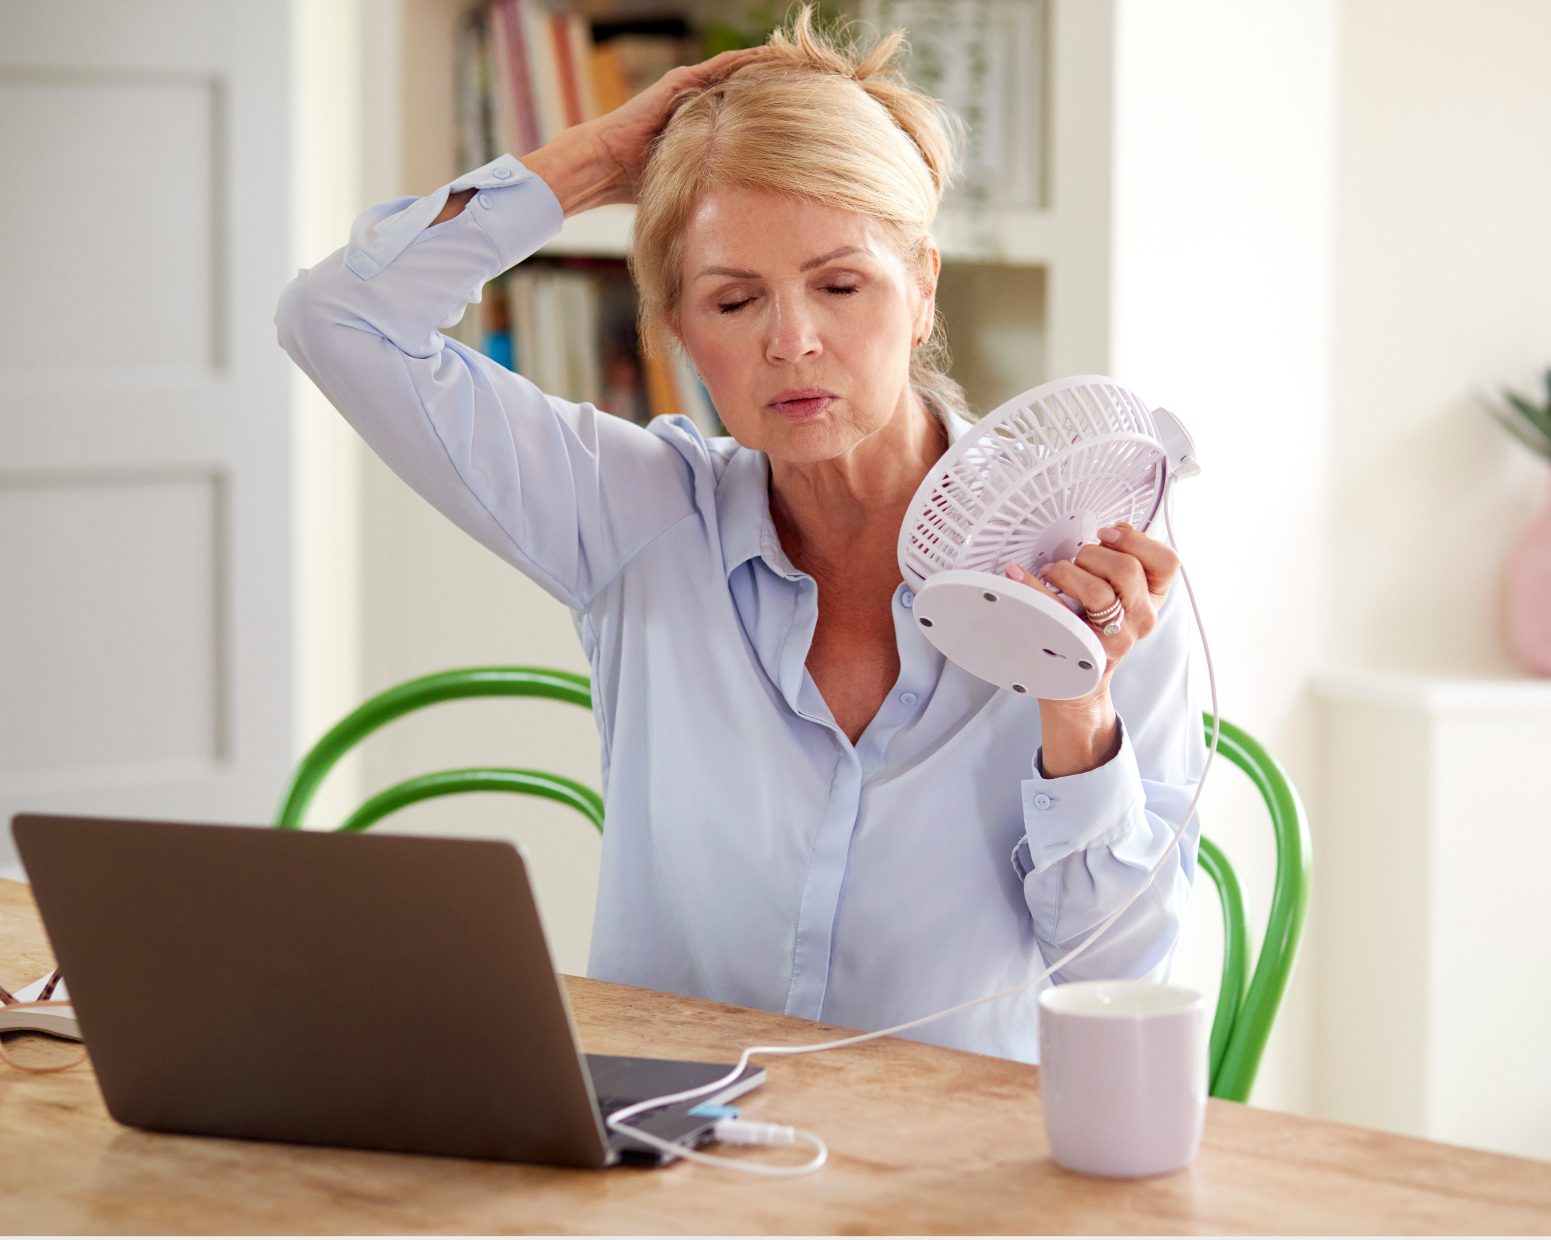 Menopause Symptoms Are Costly